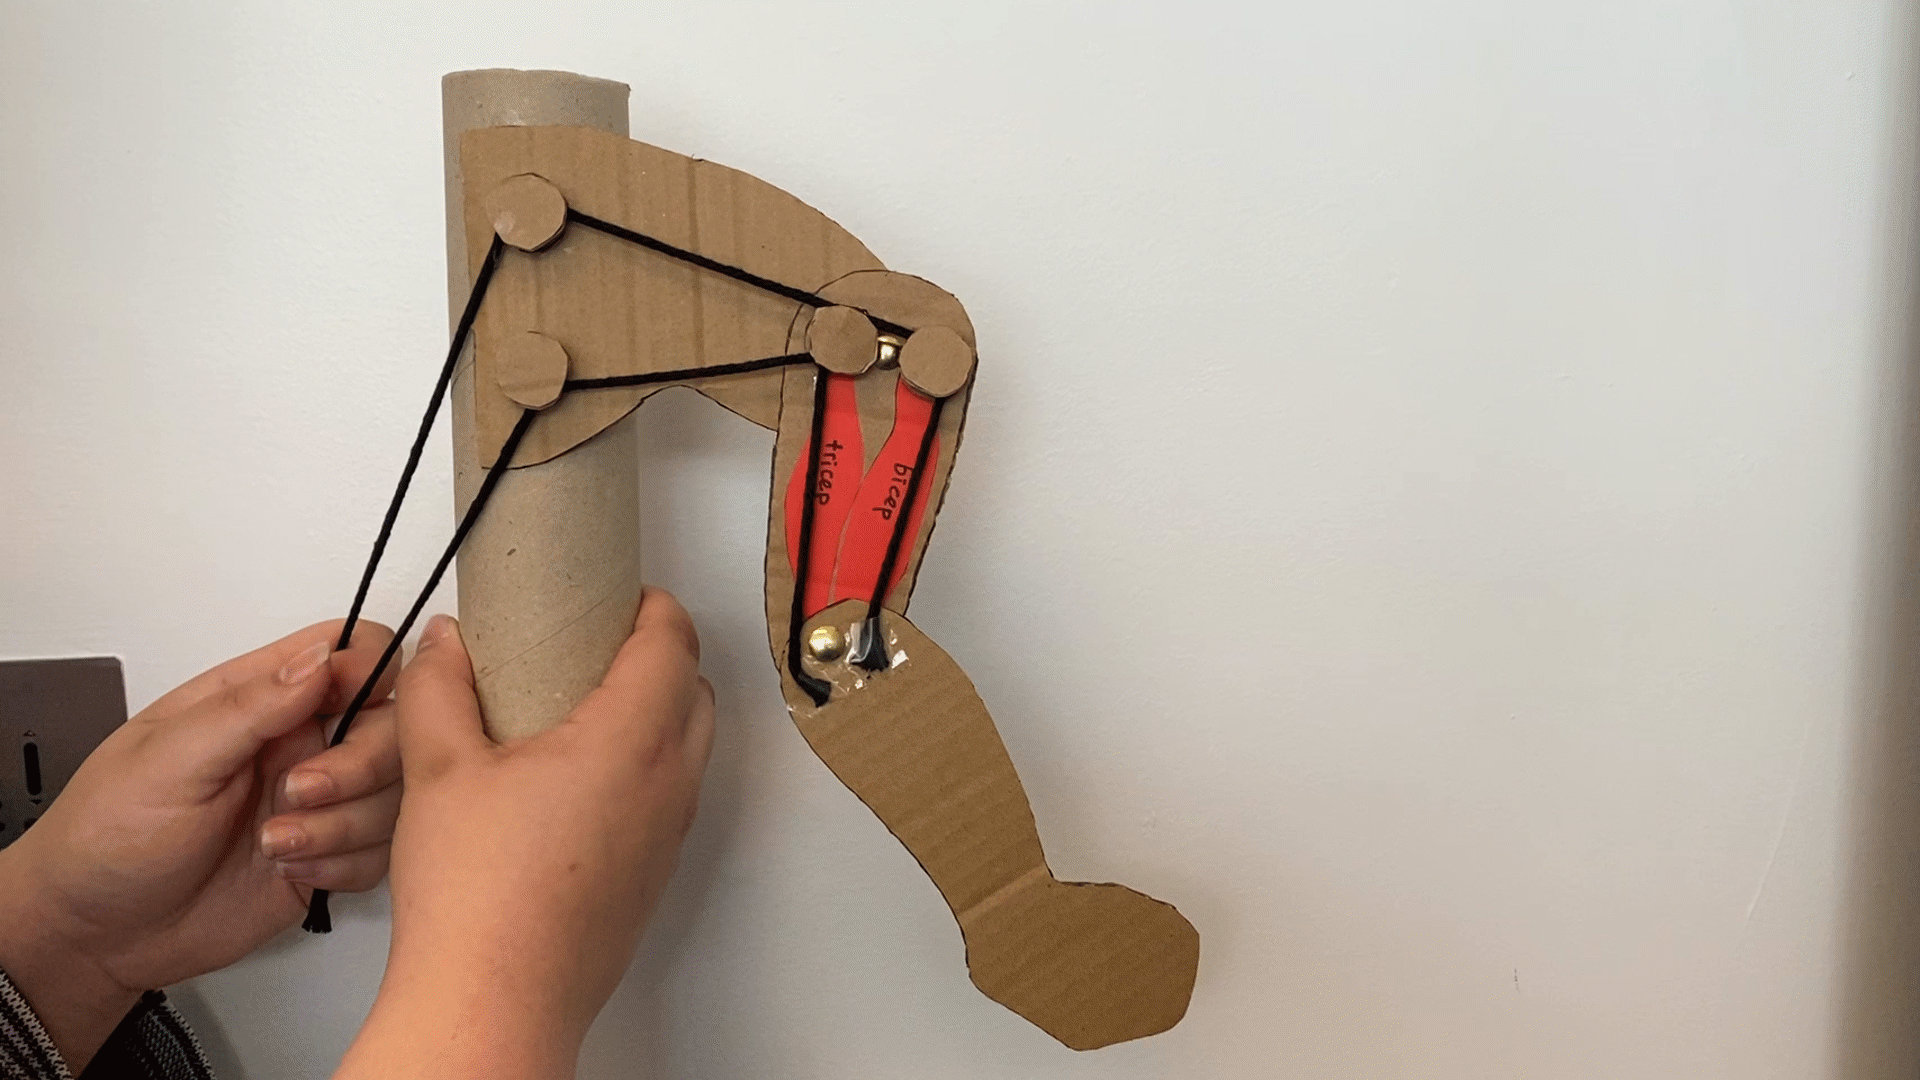 Motion of pulling the cardboard muscles using the strings